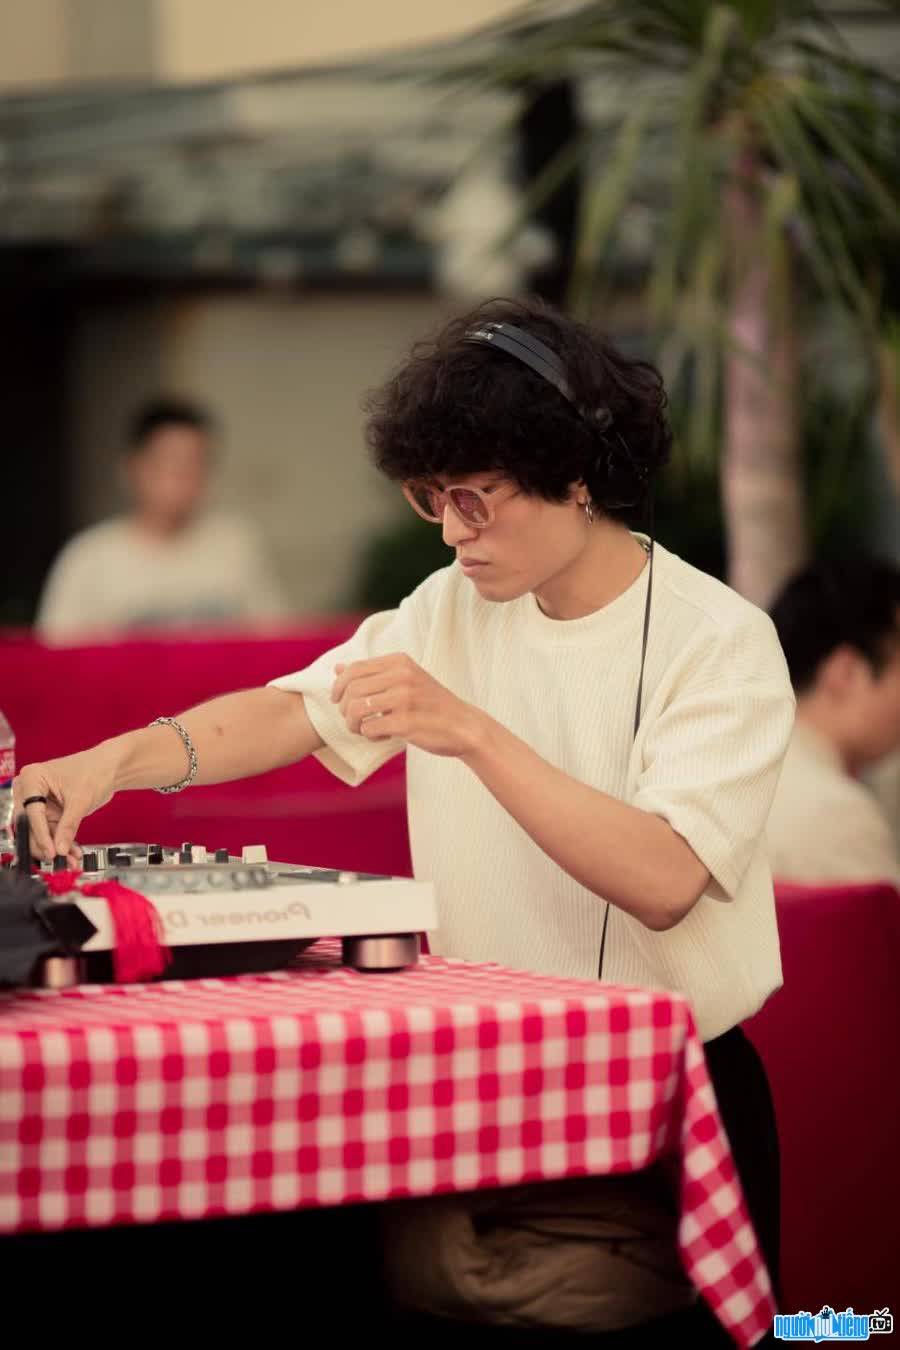 Image of producer Larria playing music